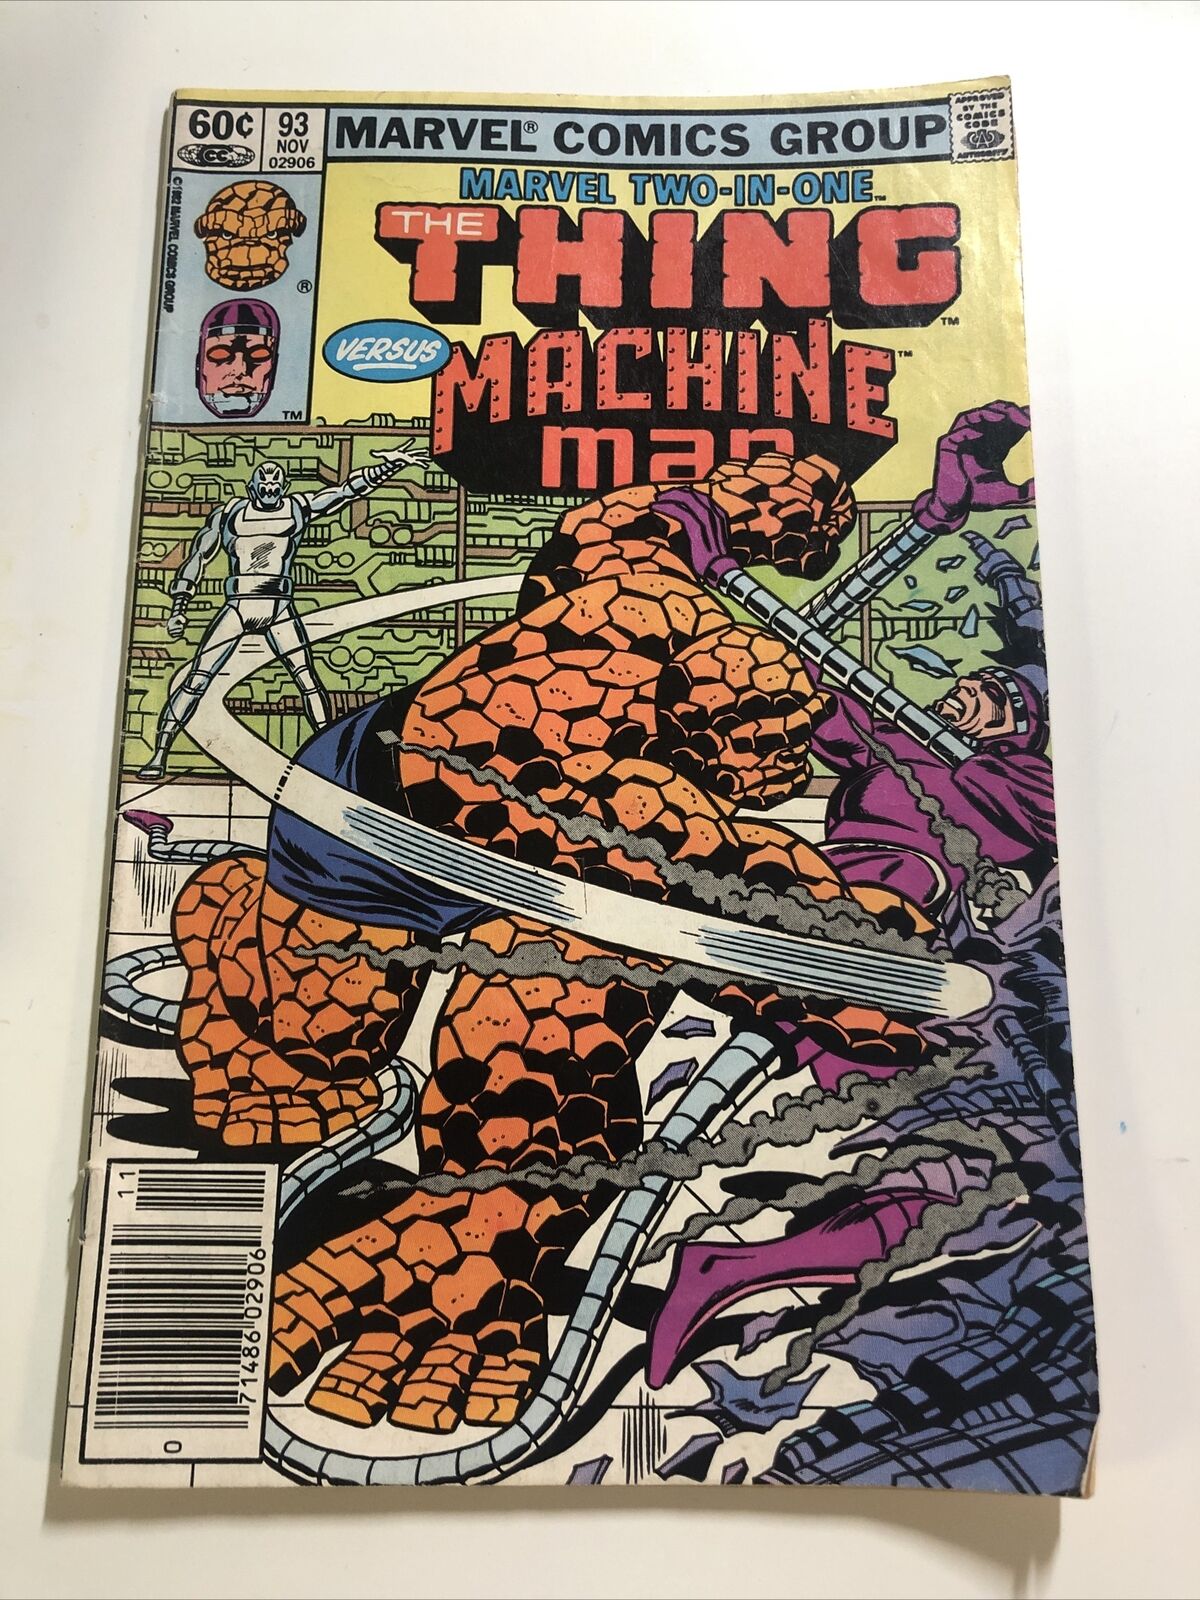 Marvel Two-In-One #93 November 1982 The Thing Ultron, Machine Man